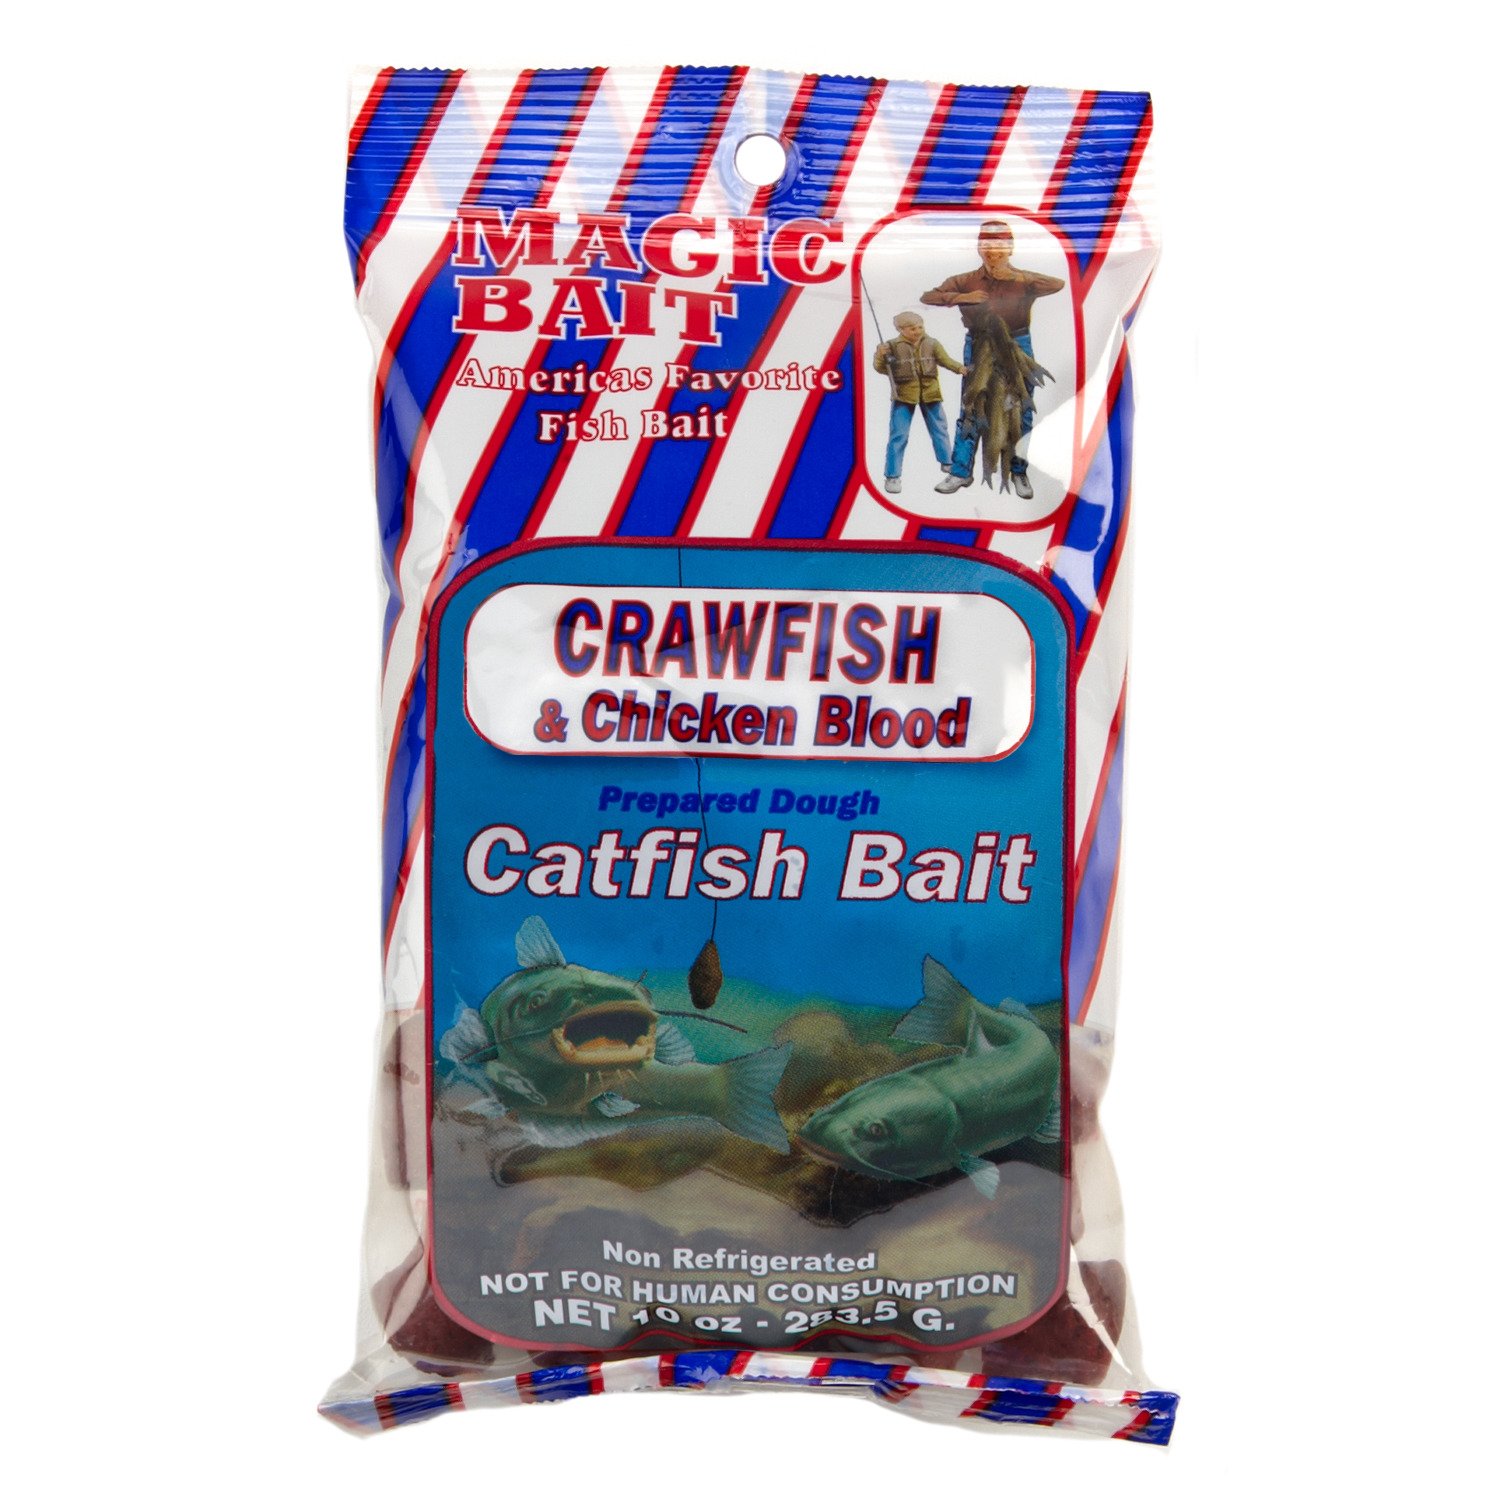 Crawfish and Chicken Blood Catfish Bait is cubed and ready for use and come...